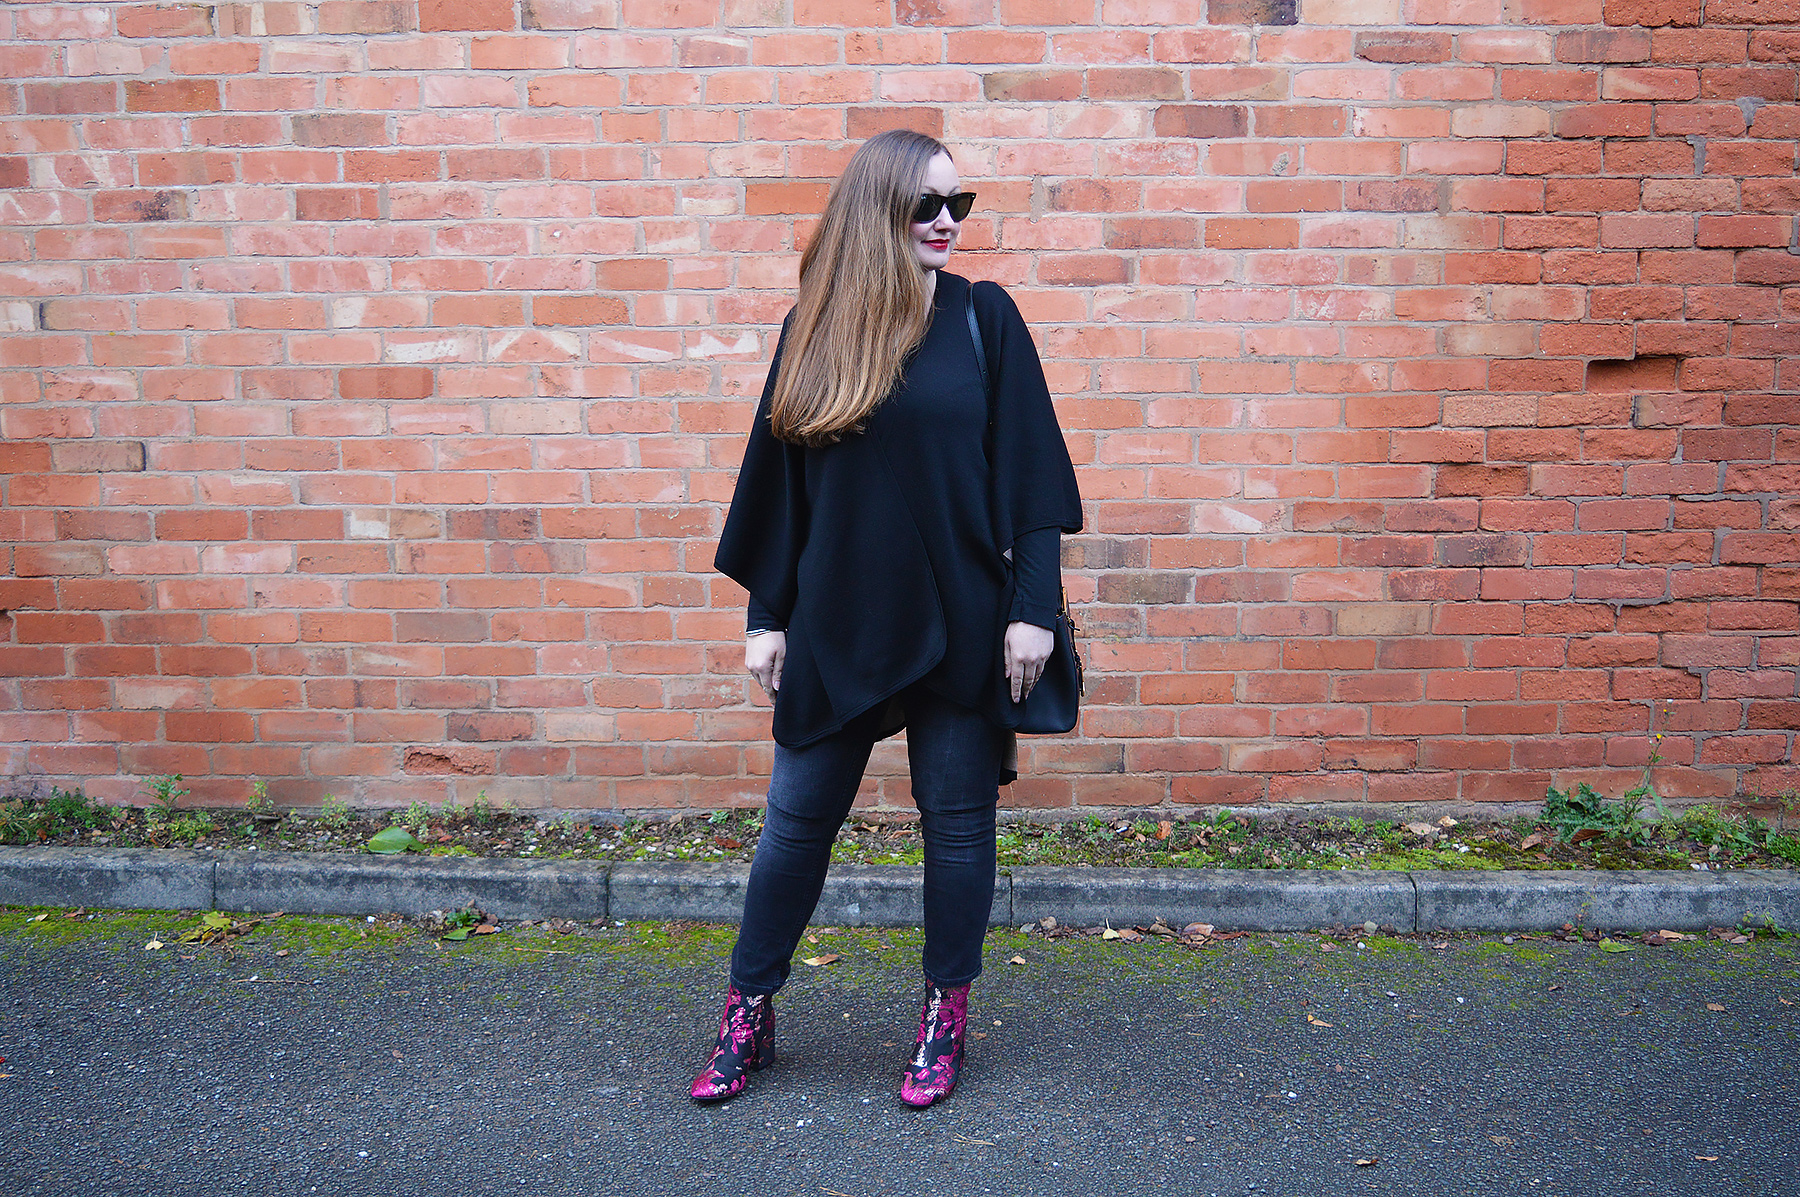 Autumn Black Poncho And embroidered outfit